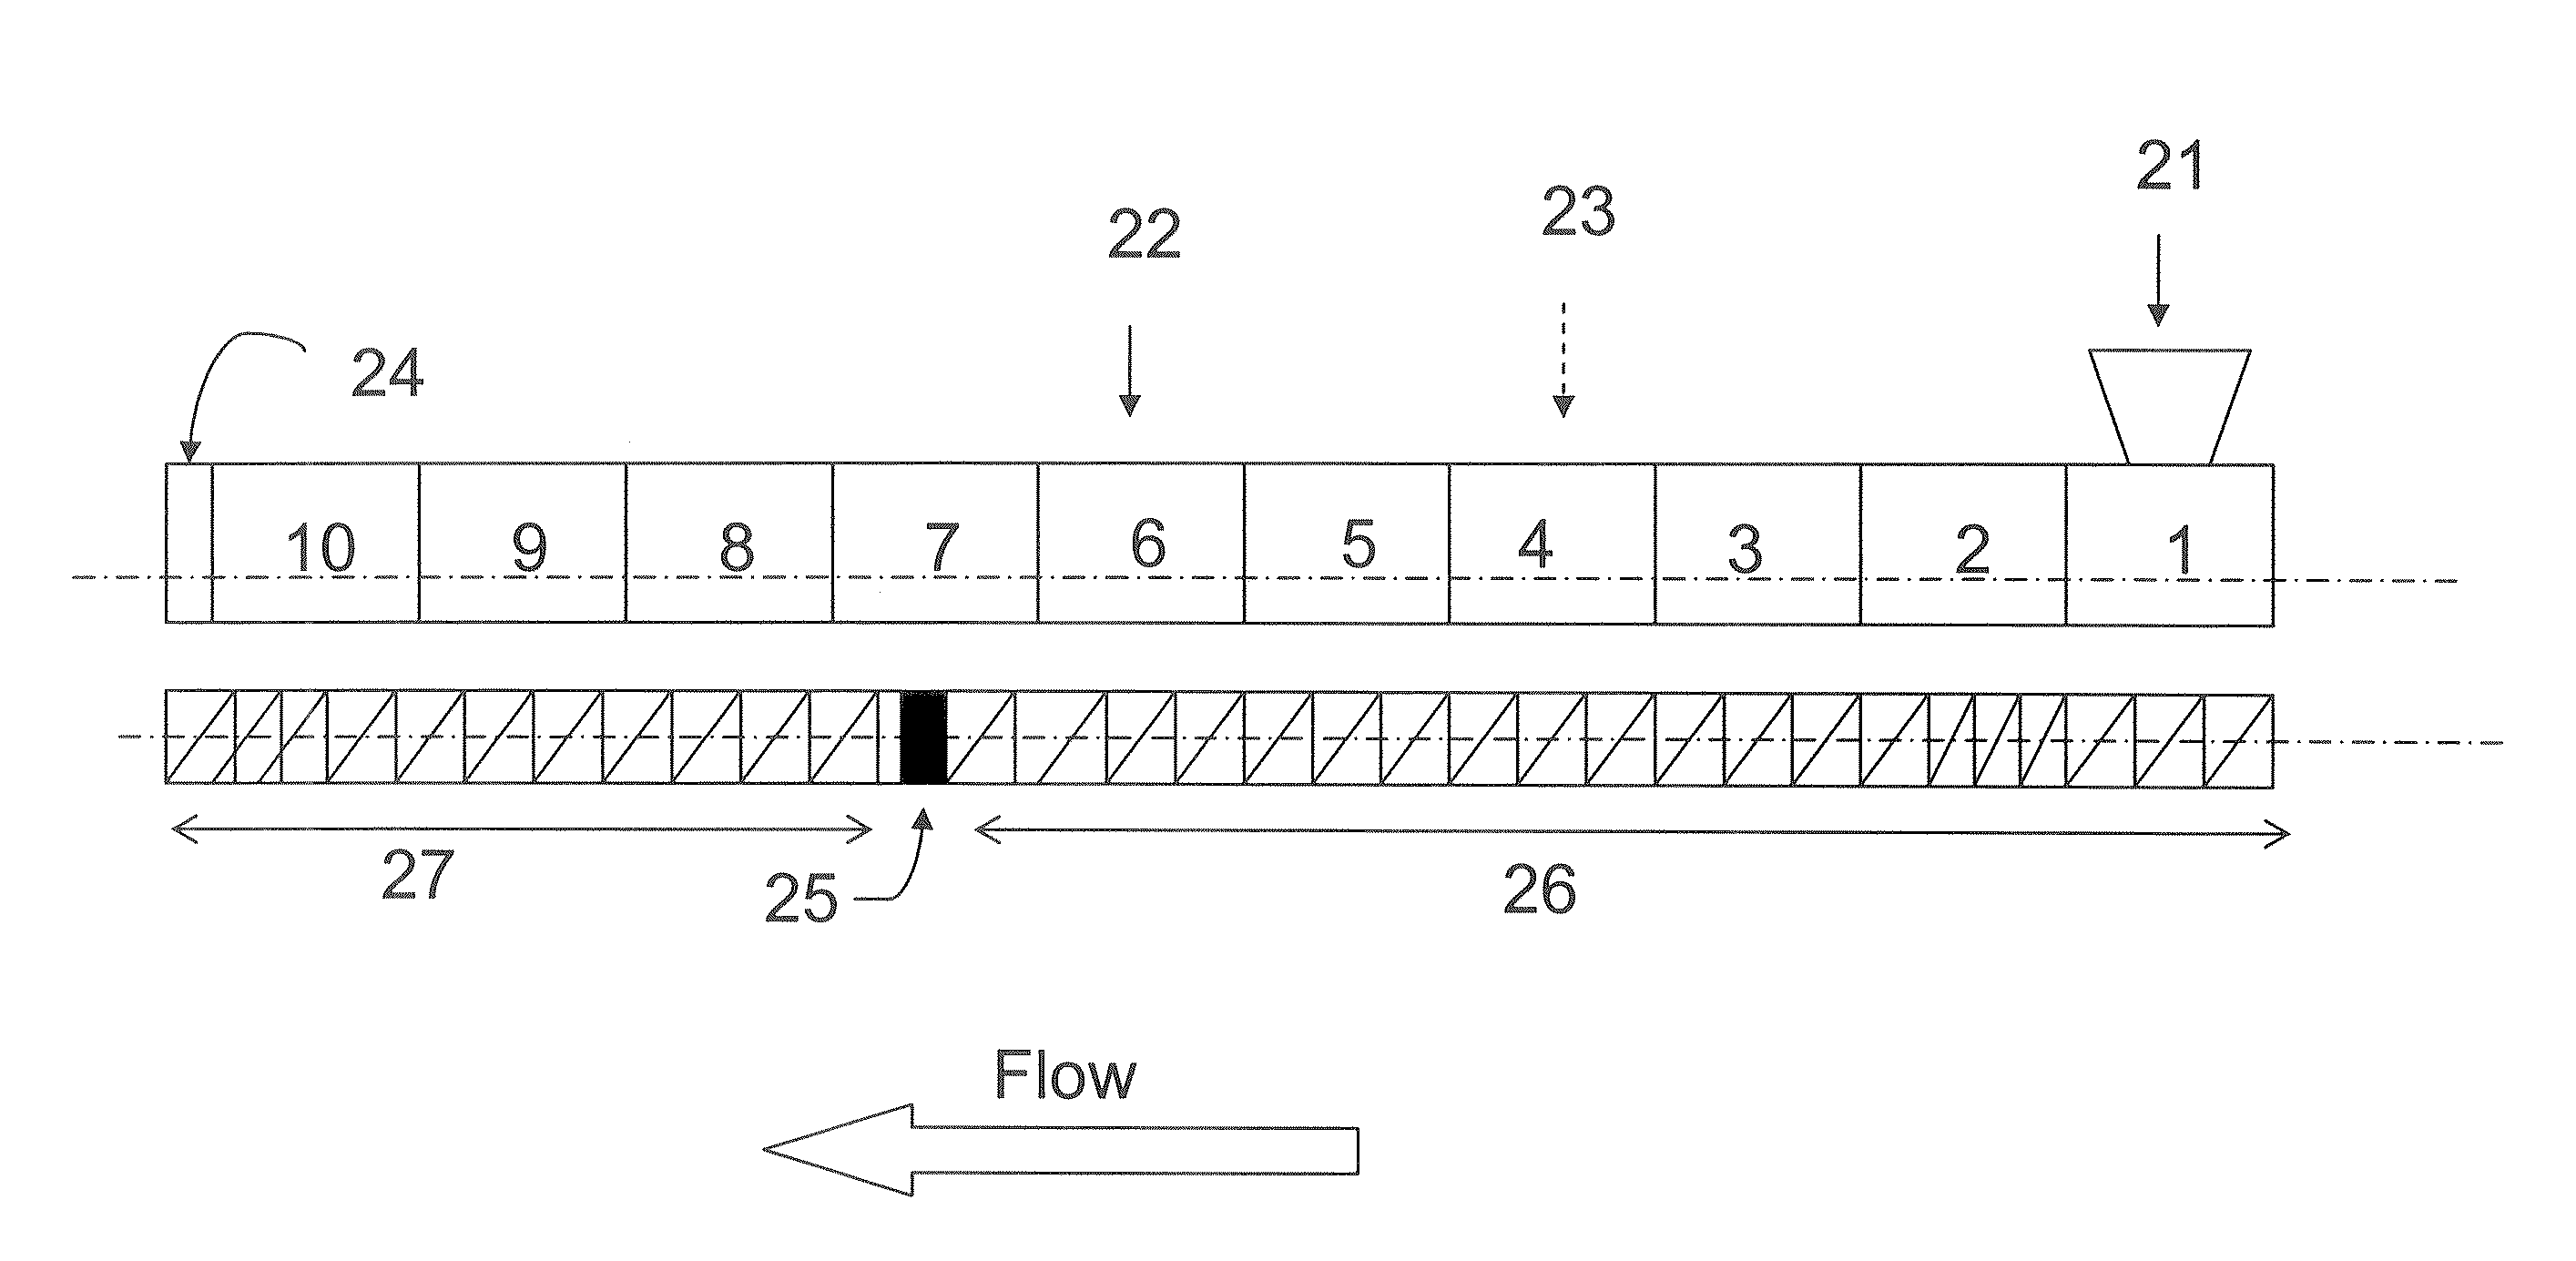 Process for manufacturing a delivery system for active components as part of an edible compostion